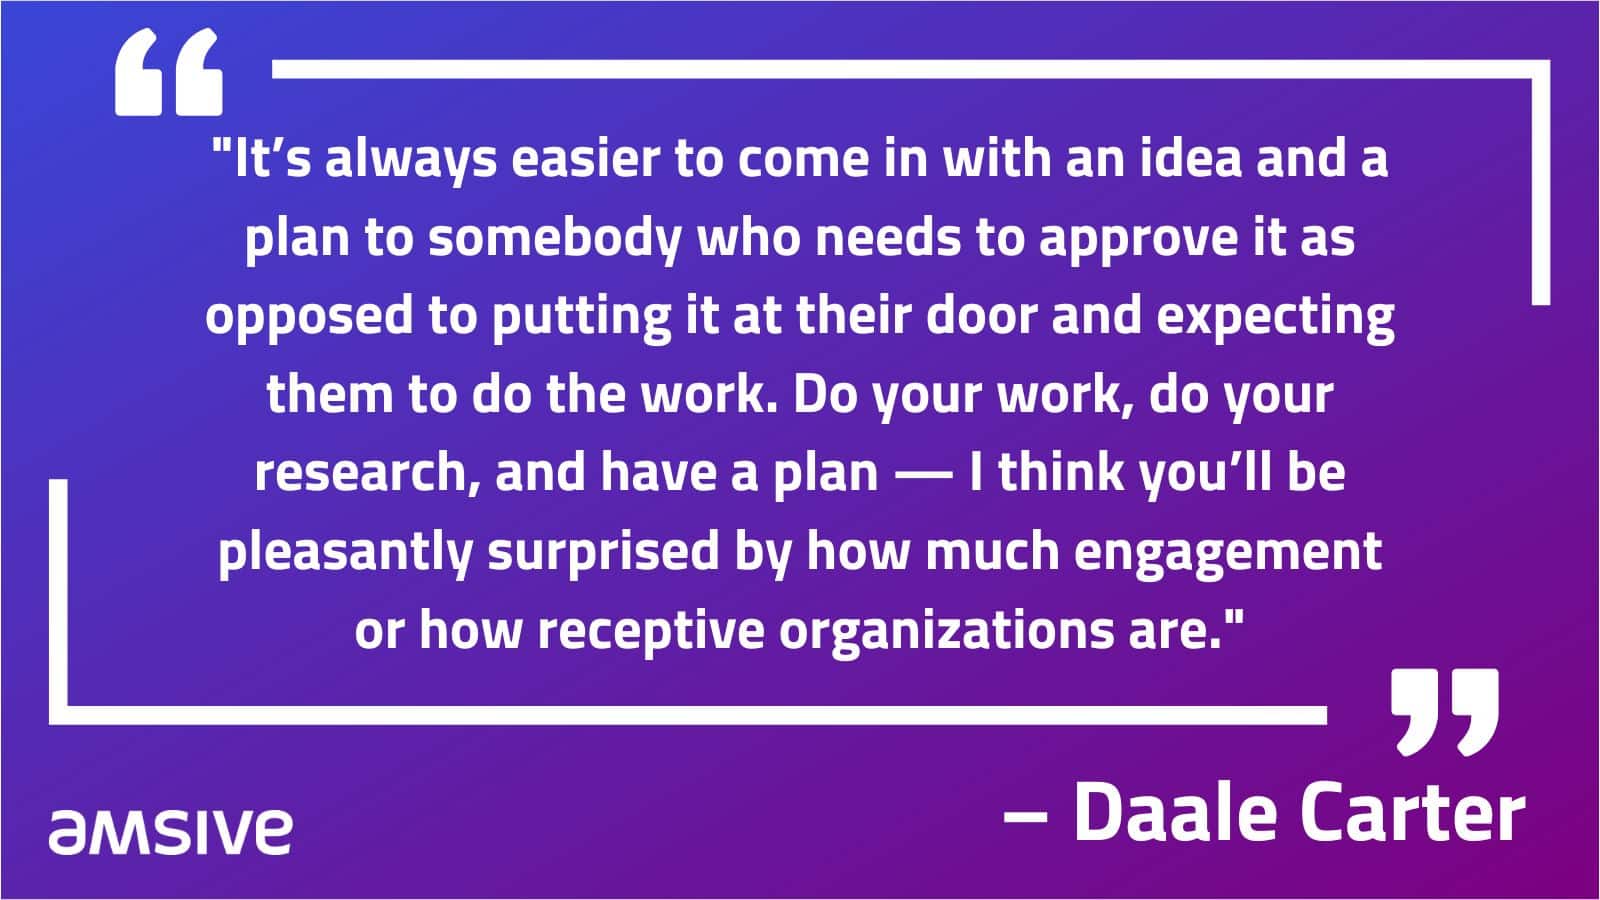 "It’s always easier to come in with an idea and a plan to somebody who needs to approve it as opposed to putting it at their door and expecting them to do the work. Do your work, do your research, and have a plan — I think you’ll be pleasantly surprised by how much engagement or how receptive organizations are." – Daale Carter